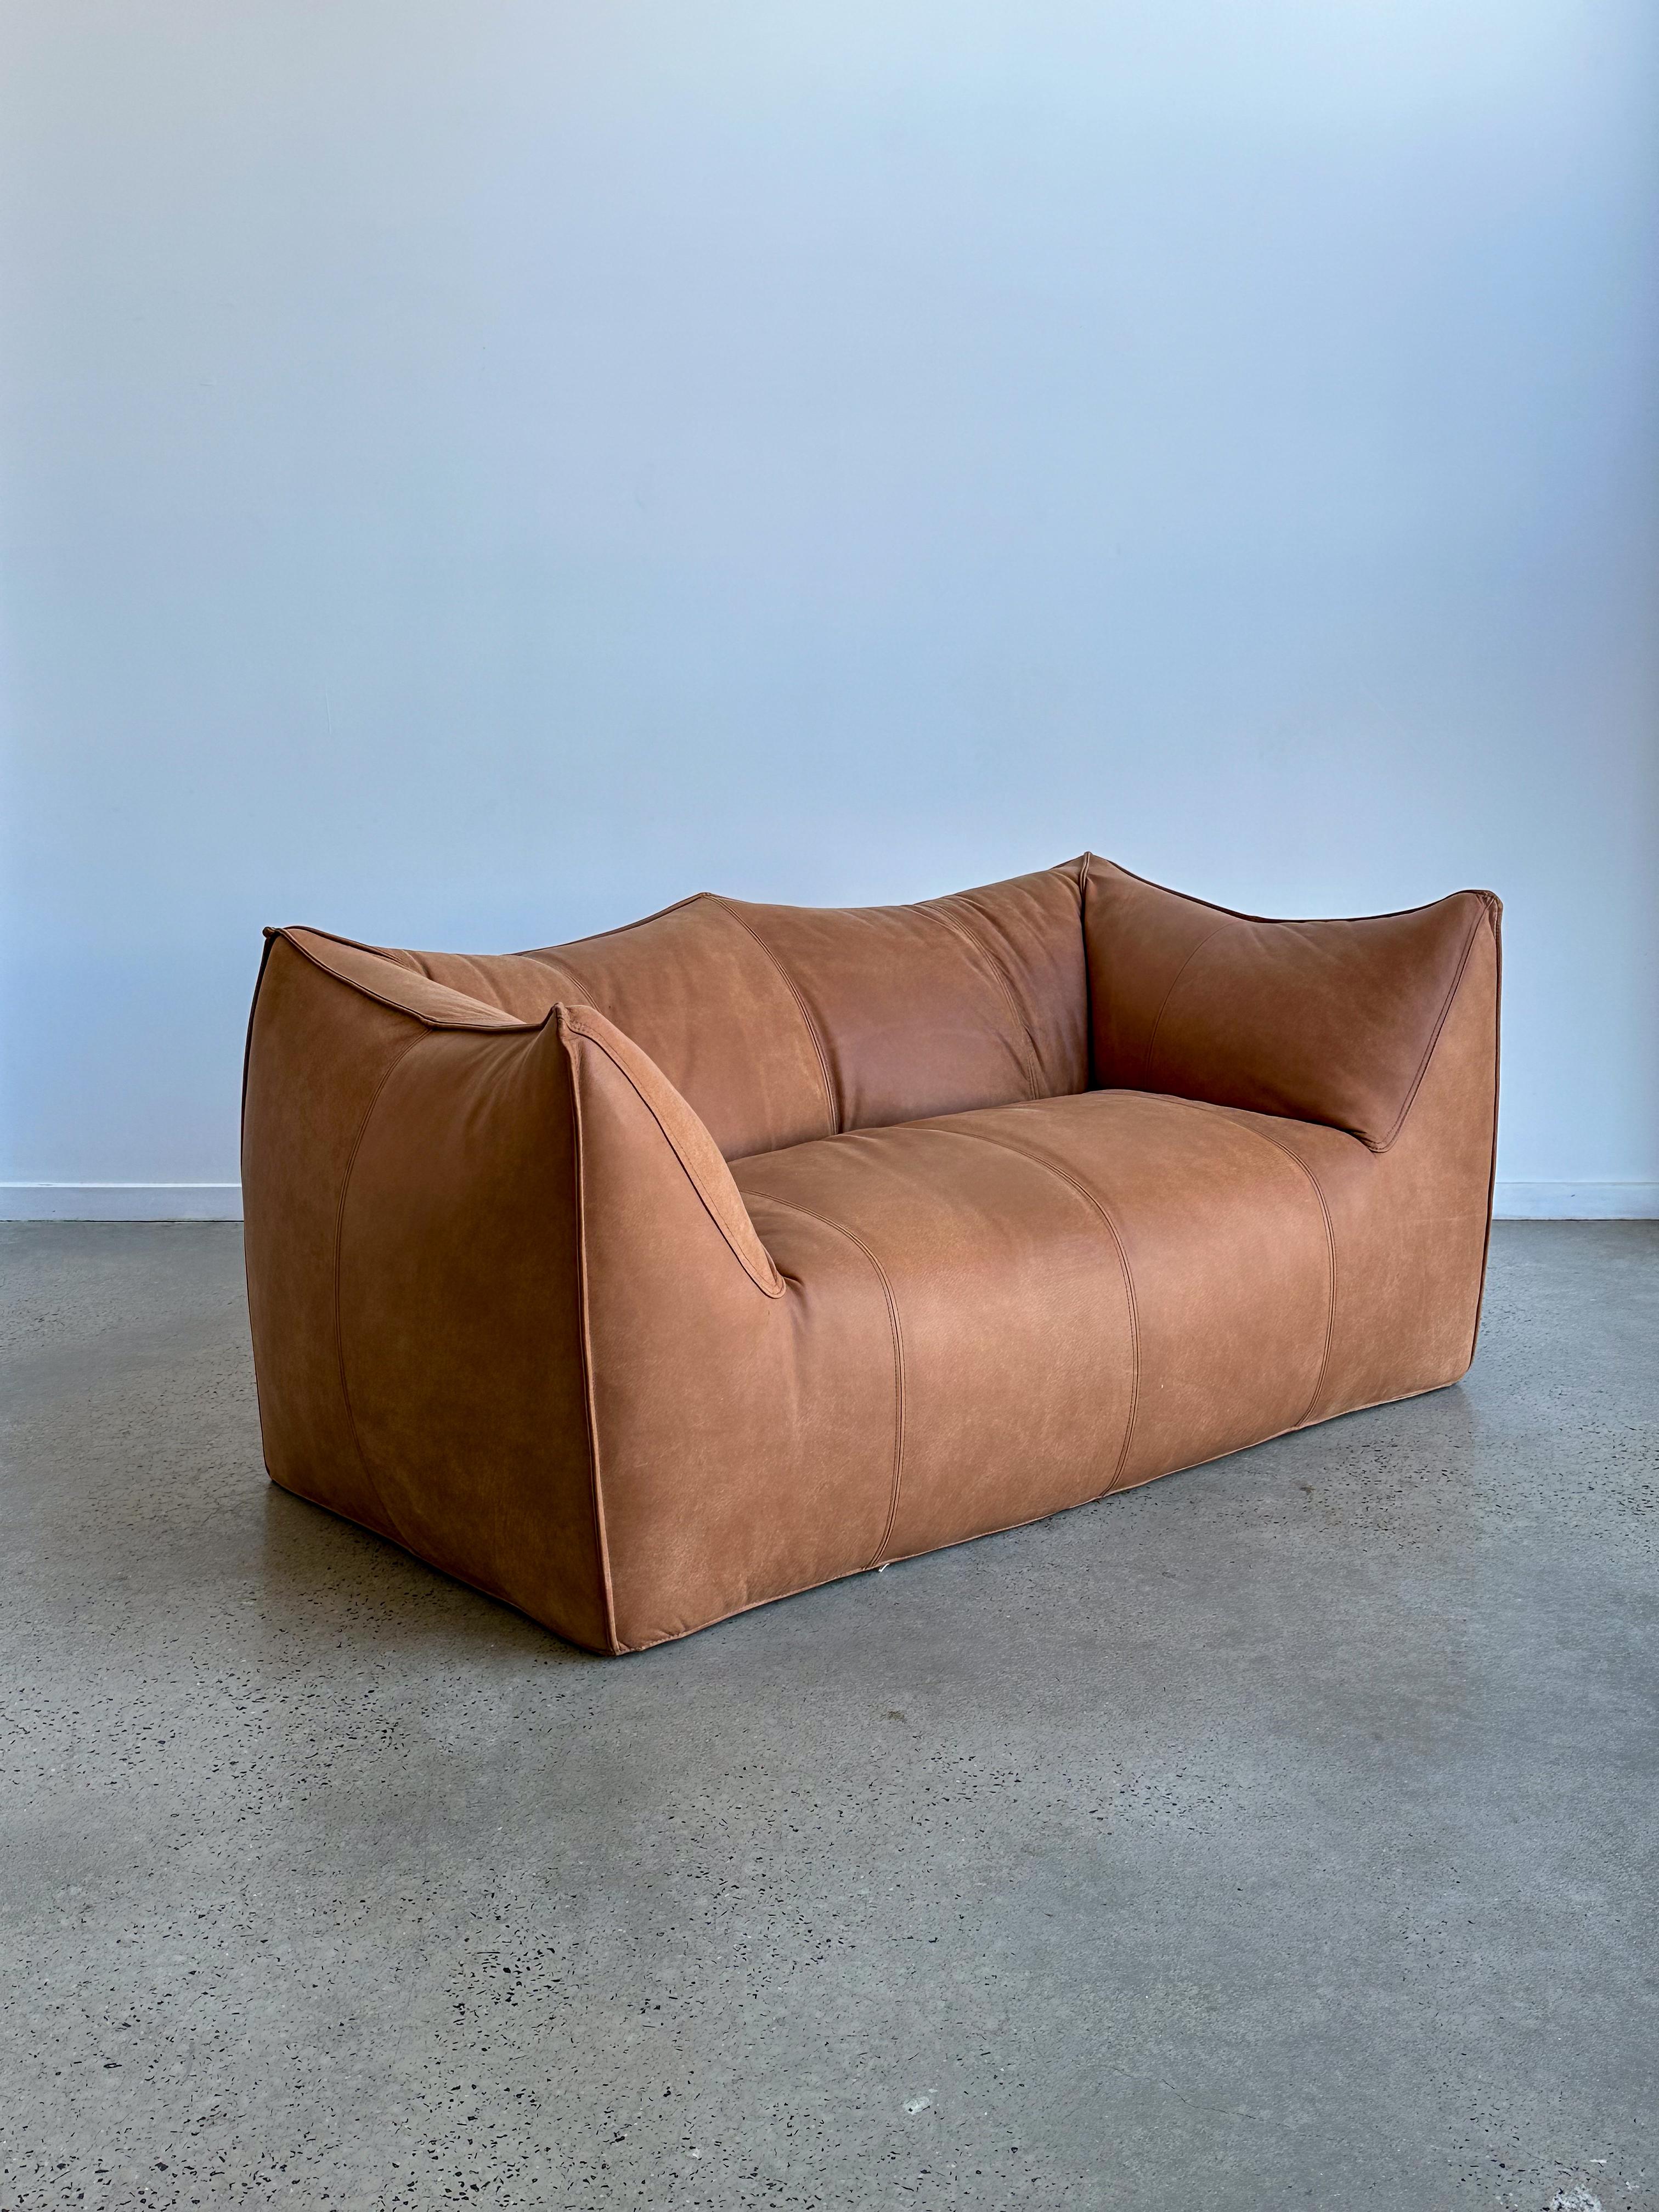 Set of two also sold separately. 
Mario Bellini for C&B Italia, 'Le Bambole' sofa, brown patinated leather, Italy, 1972. This piece is one of the very rare prototypes or early editions, and still 100% original, read on. In the Bambole, the piece is